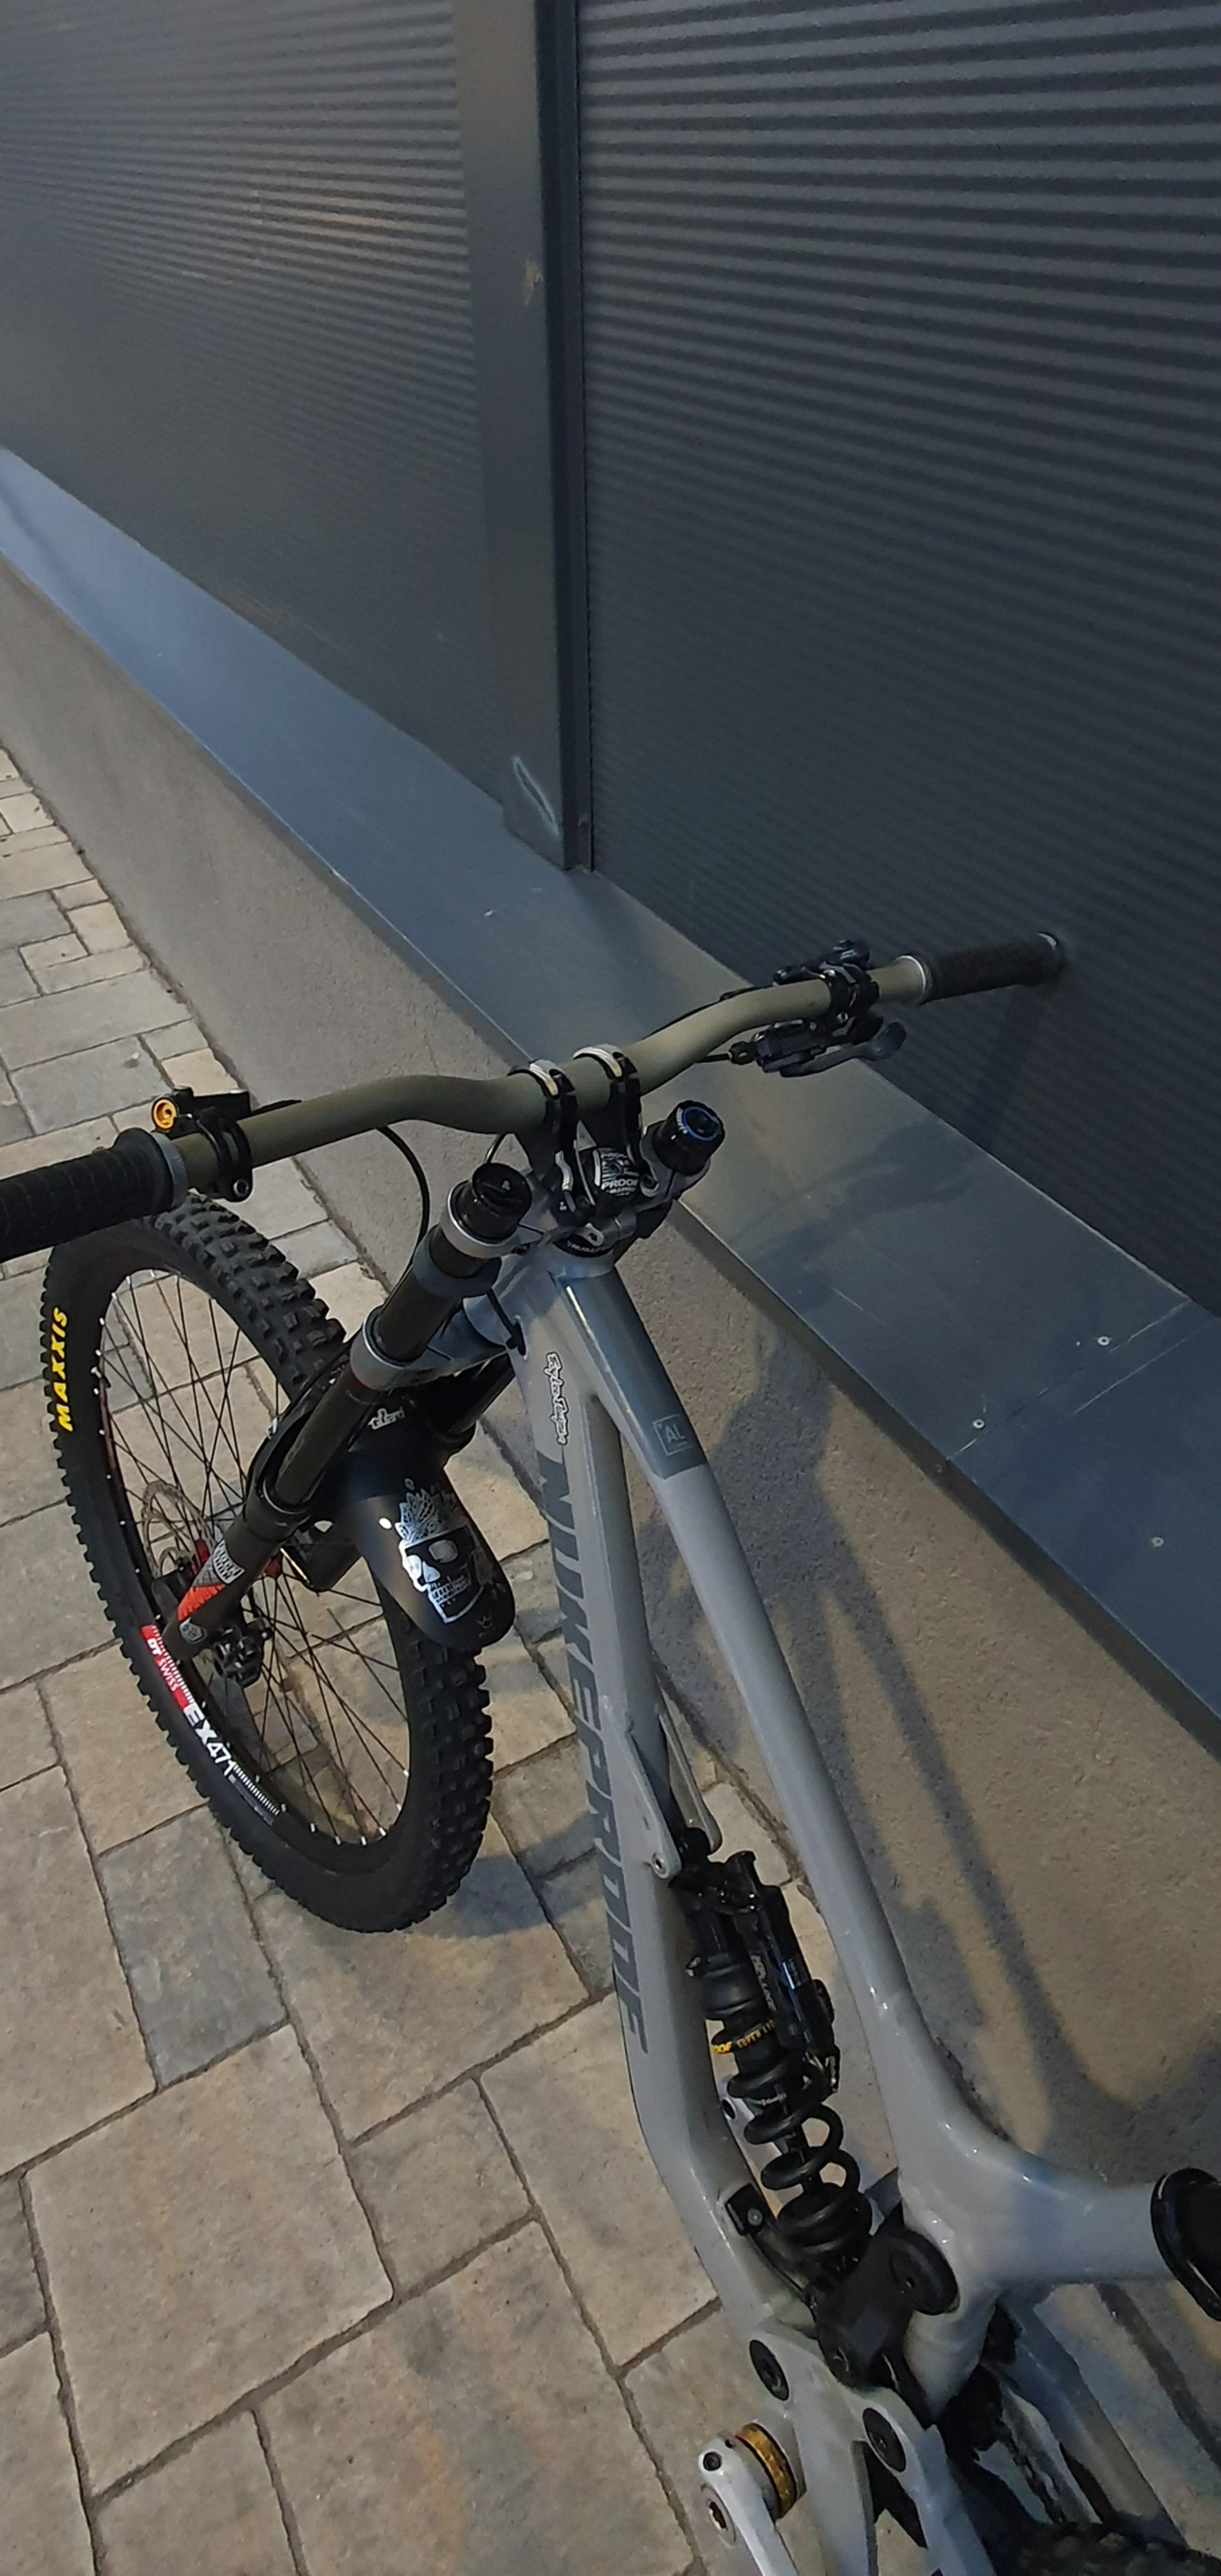 2. Nukeproof Dissent 275 Mullet